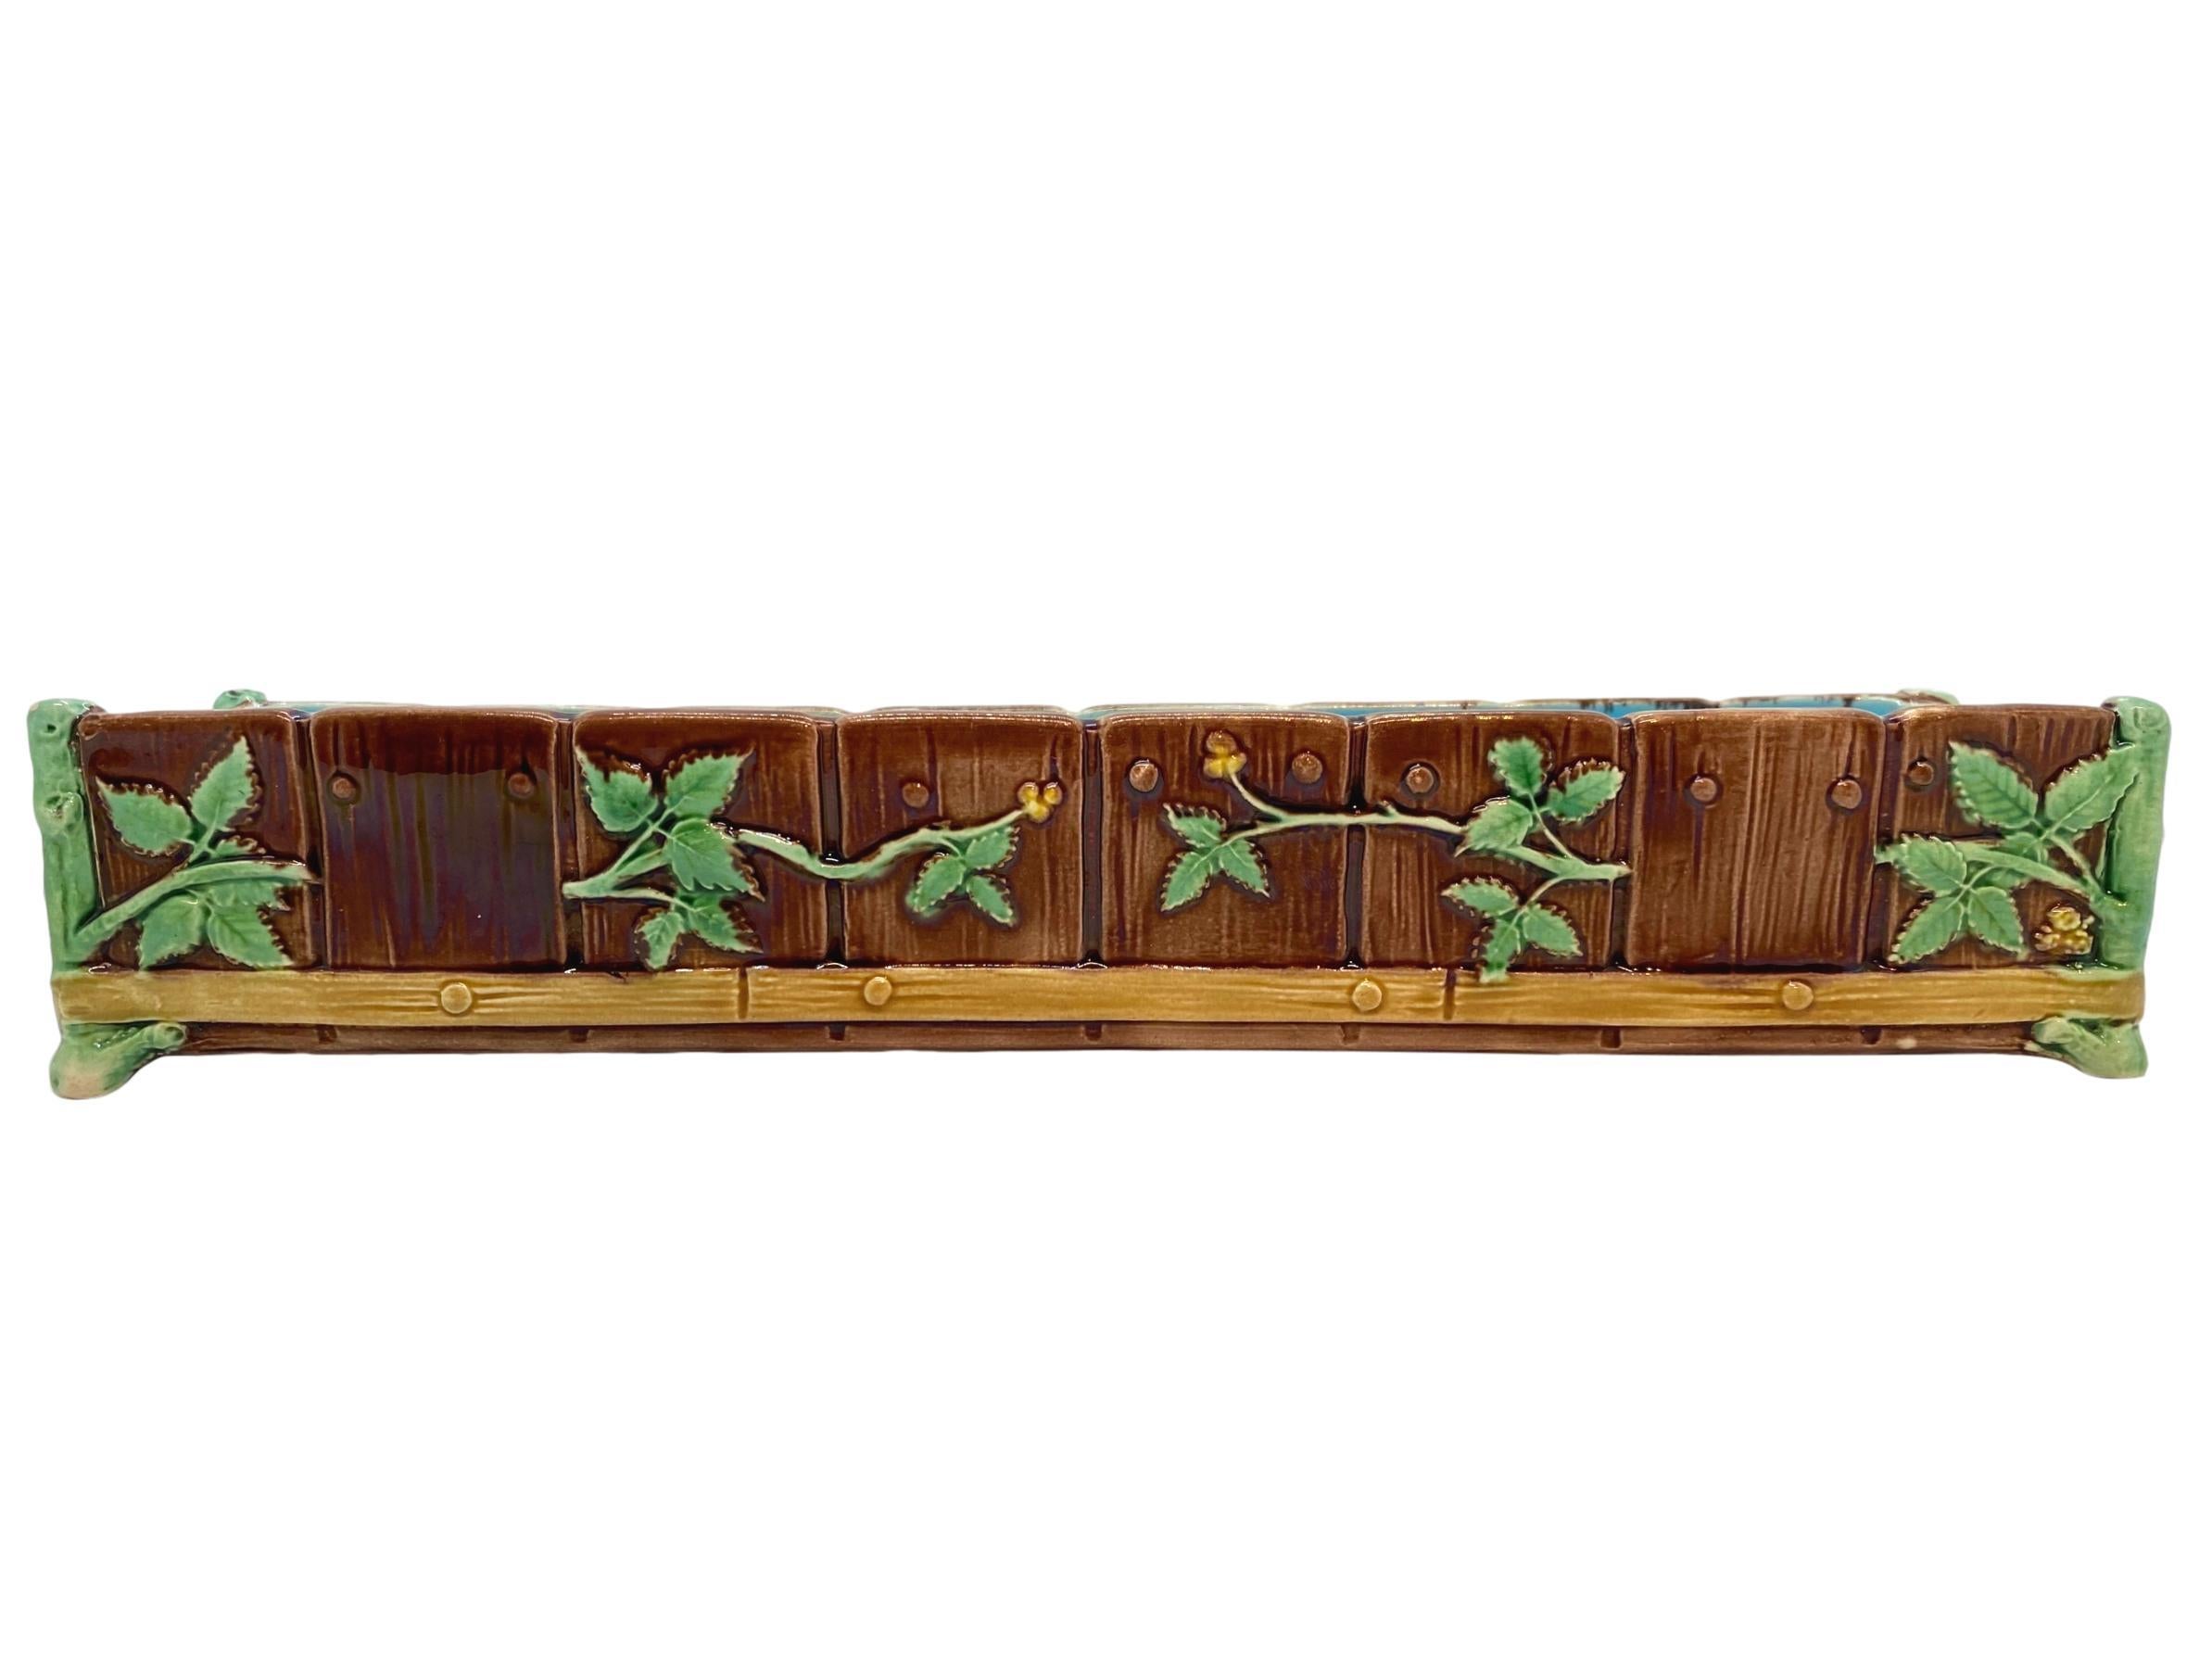 Minton Majolica Small Jardiniere, realistically molded as a simulated water trough formed by faux wooden staves and pegs, overlain with budding Hawthrone branches, the corners formed as mossy posts, banded near the base with pegged logs, the